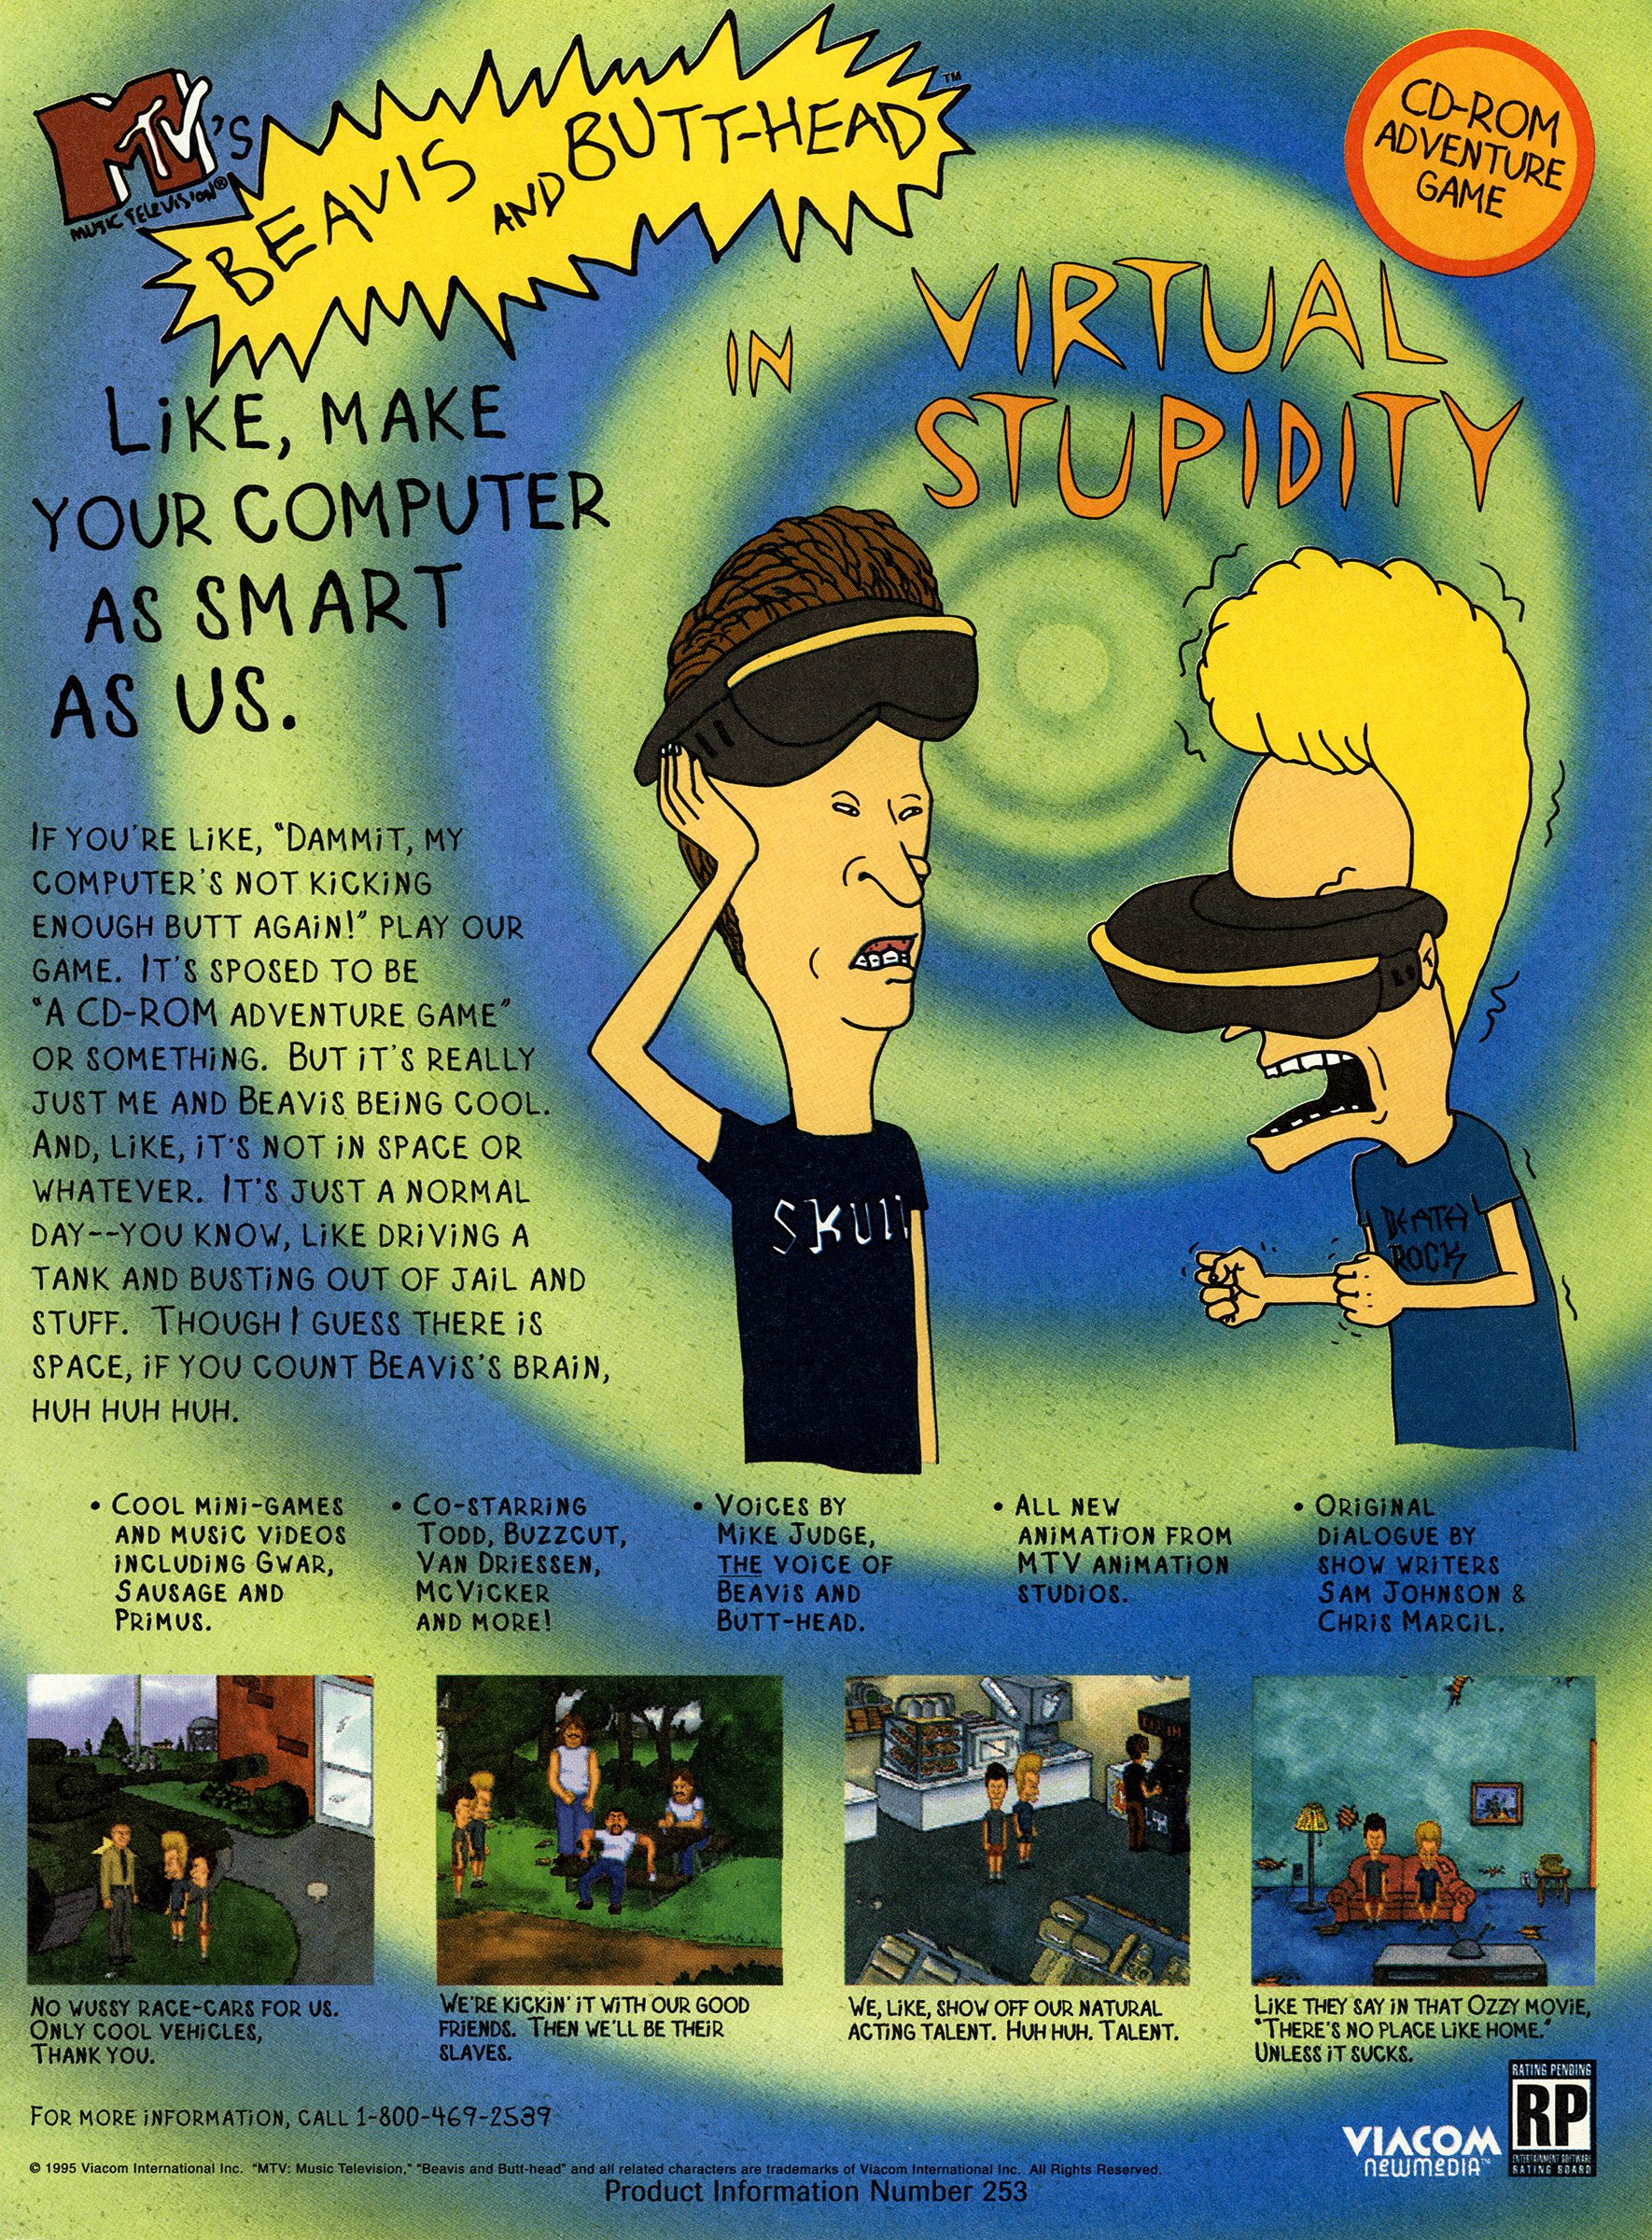 beavis-and-butthead-in-virtual-stupidity-december-1995-b-retromags-community